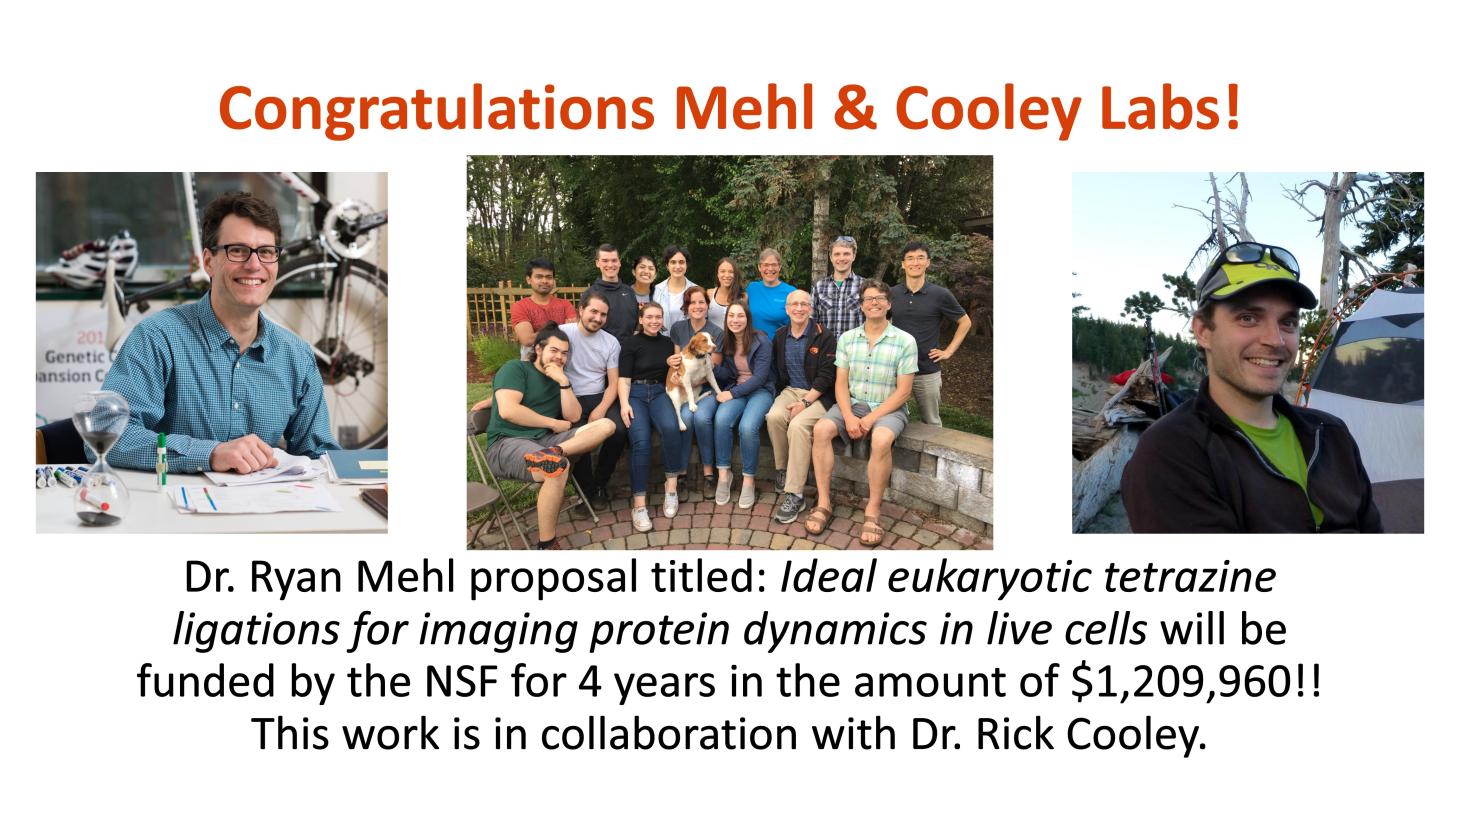 Portrait photos of Dr Mehl, Dr Cooley, and their lab group.